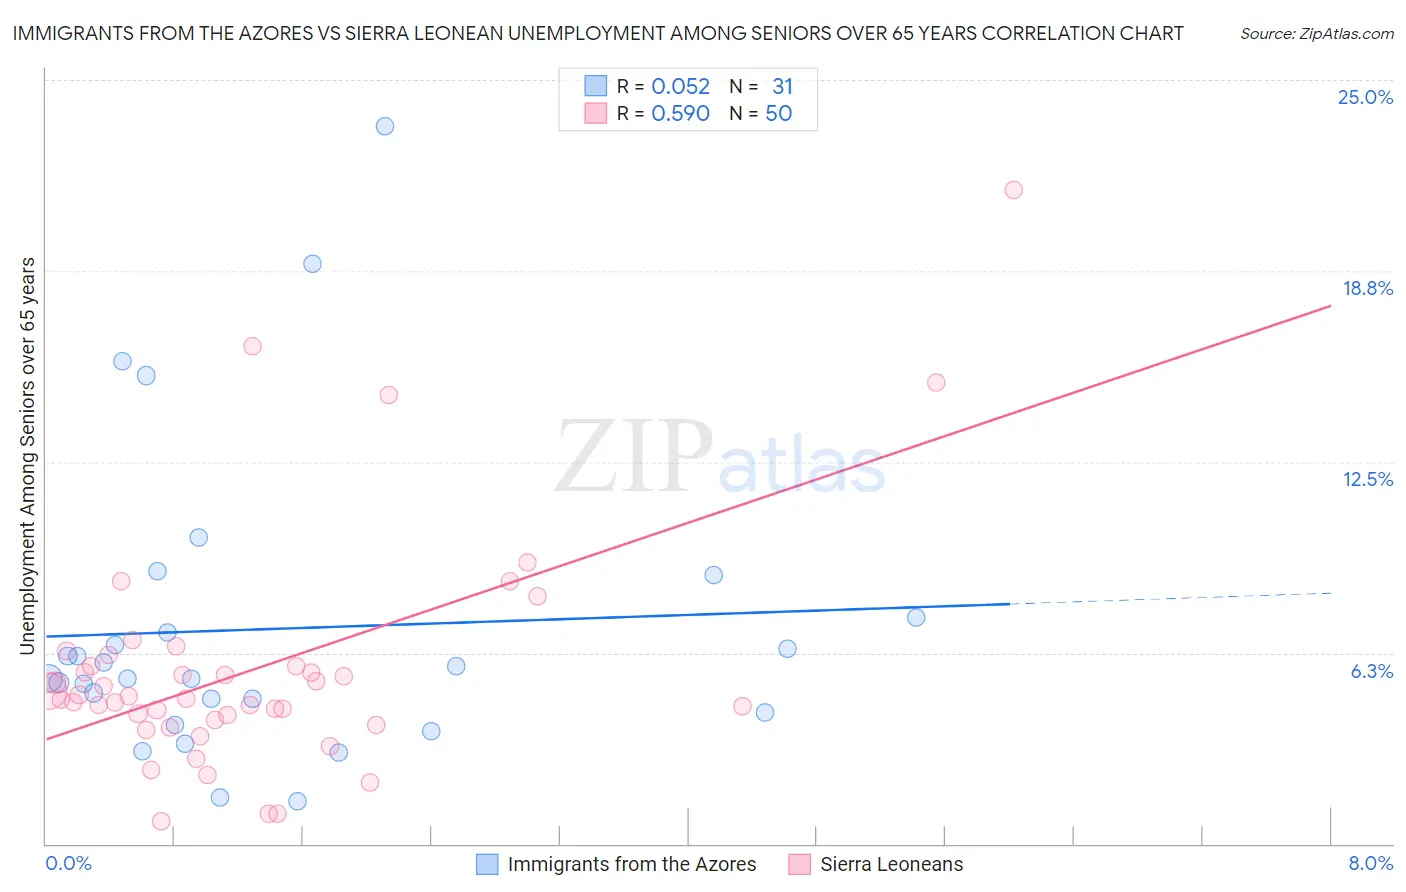 Immigrants from the Azores vs Sierra Leonean Unemployment Among Seniors over 65 years